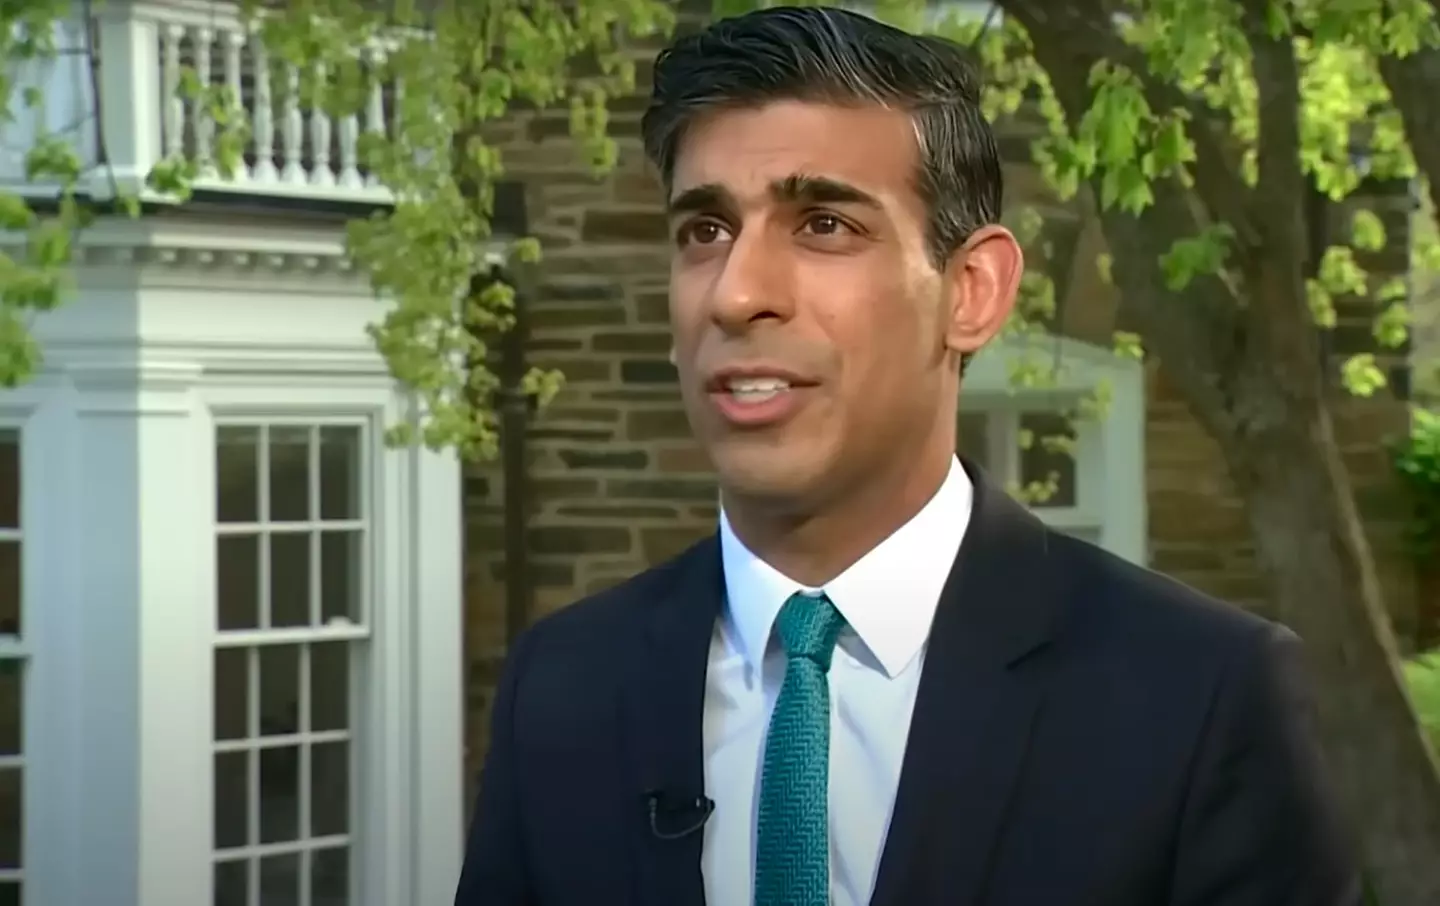 Rishi Sunak previously pledged to ban smart motorways when he was running for the Conservative Party leadership.